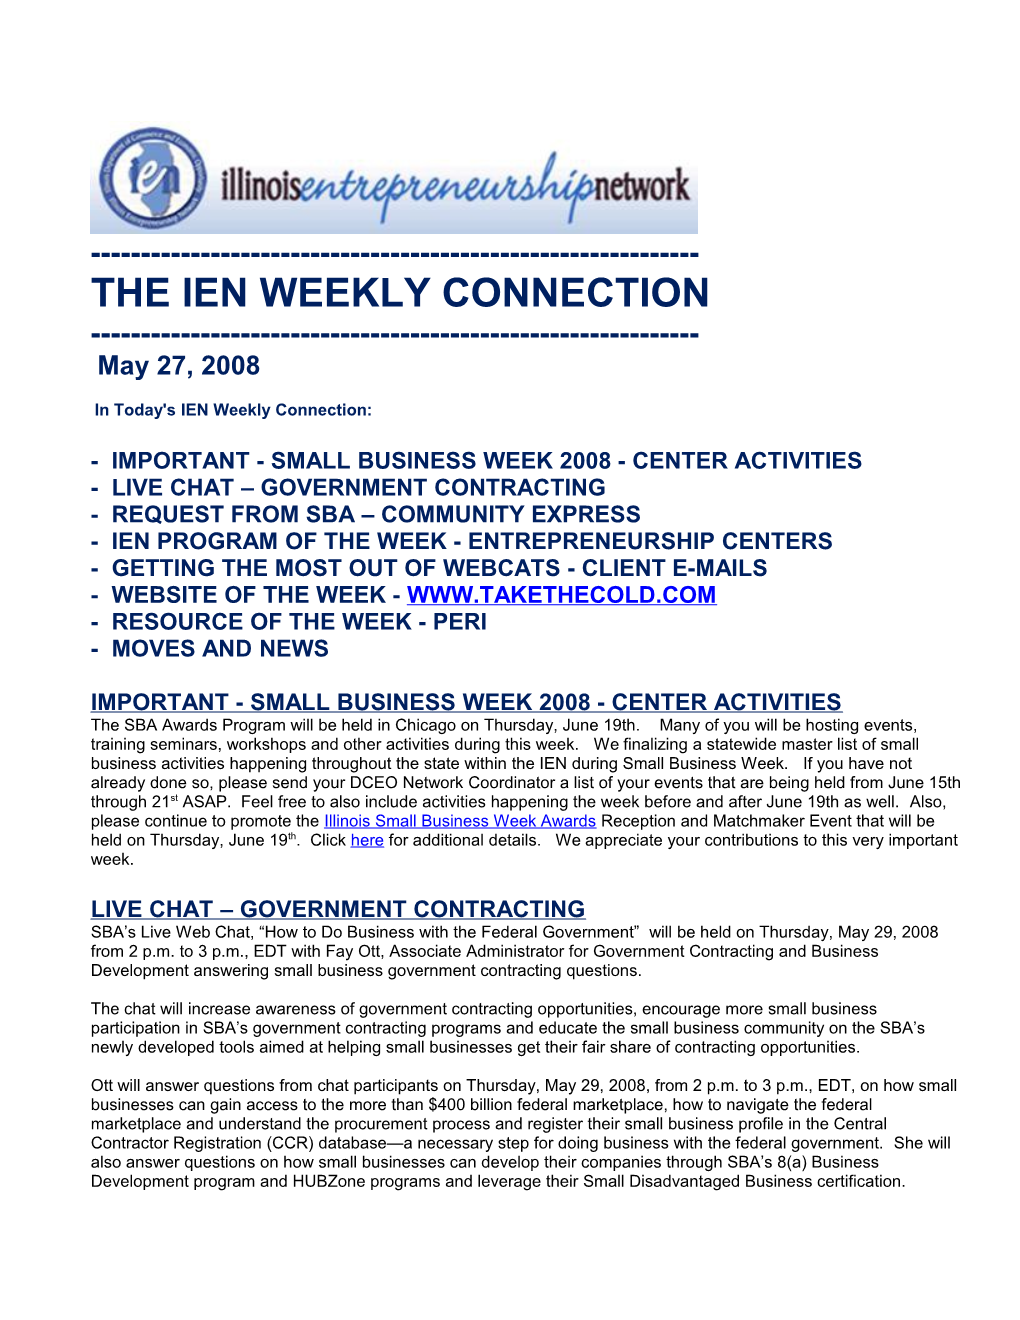 In Today'sien Weekly Connection s1